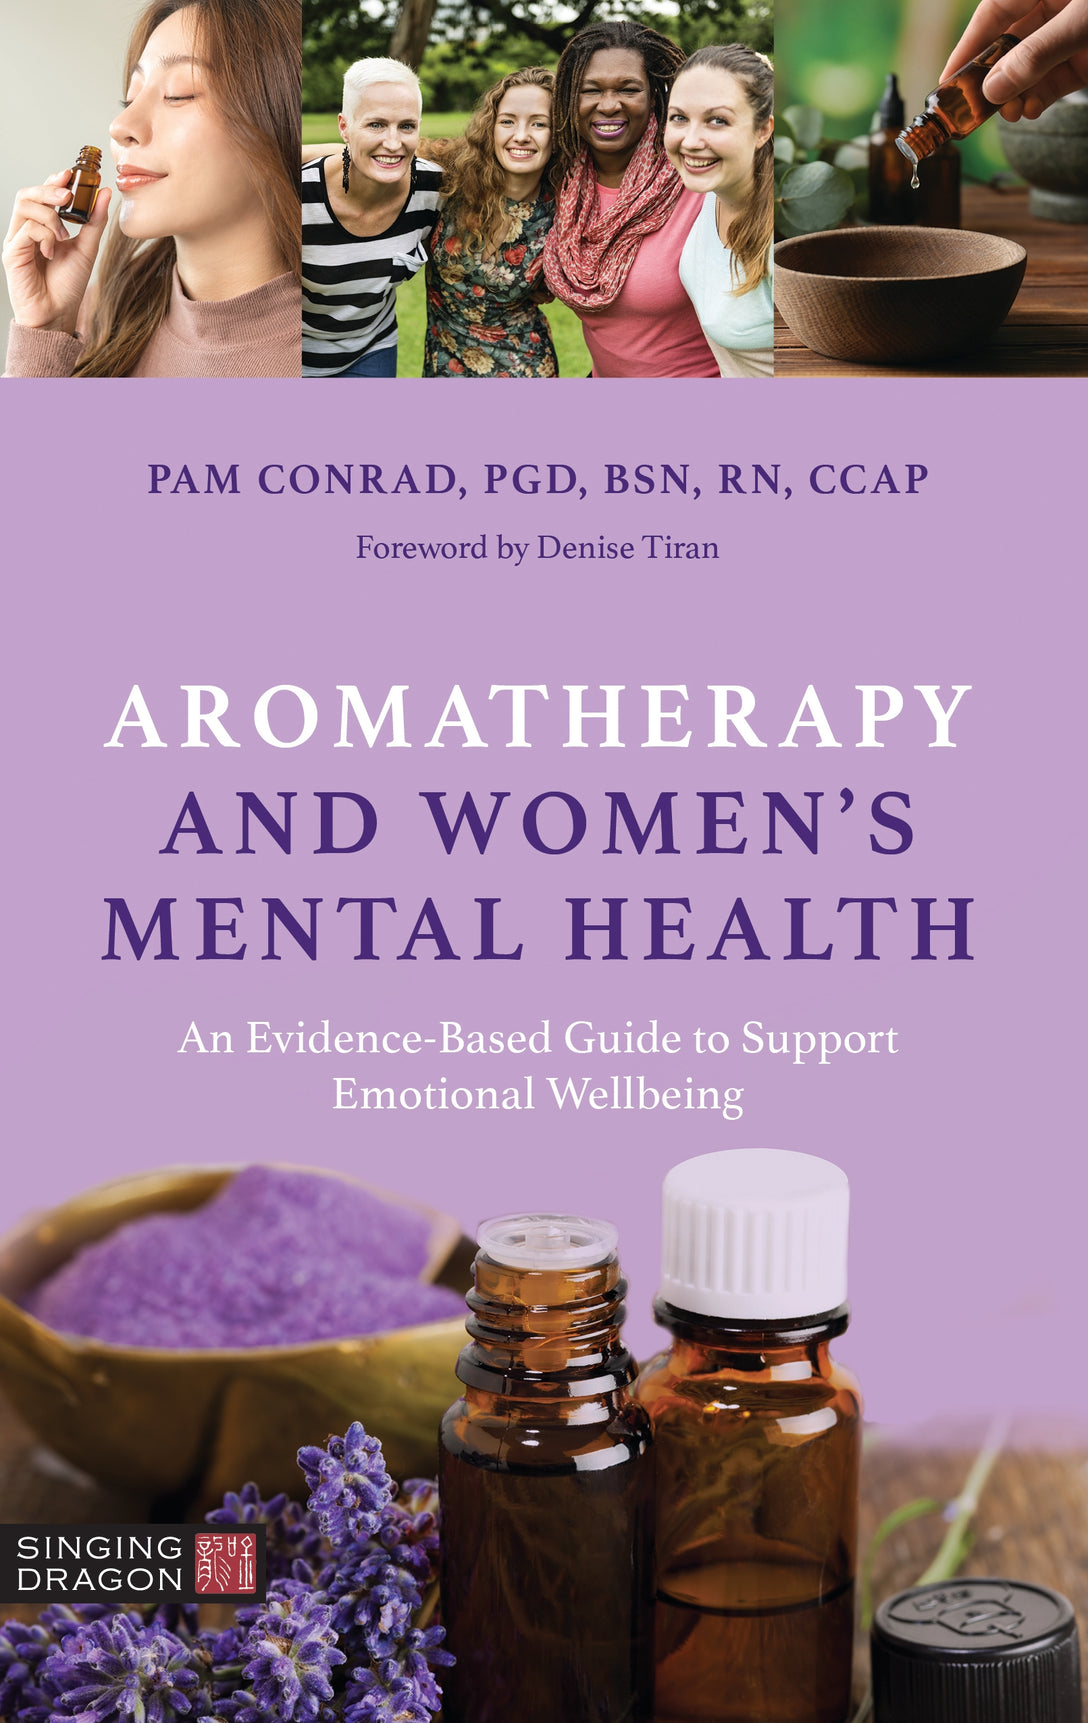 Aromatherapy and Women’s Mental Health by Pam Conrad, Denise Tiran